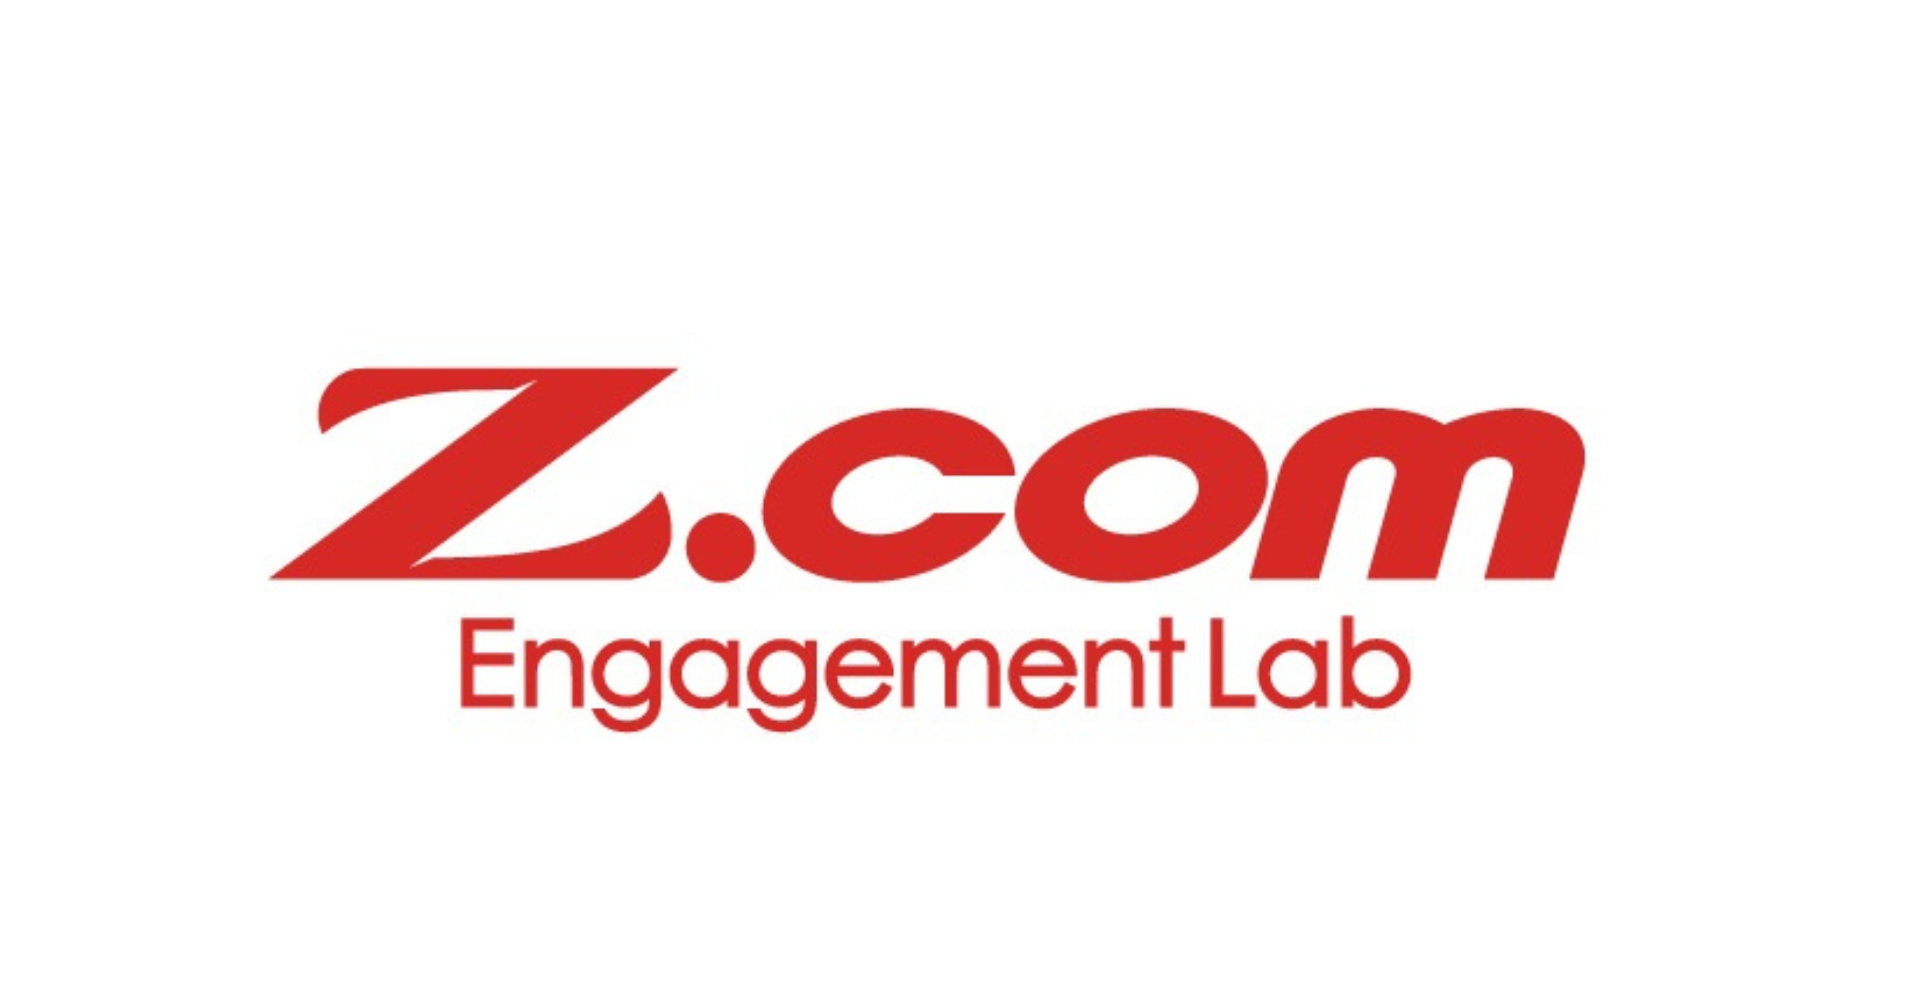 Engagement Lab launched